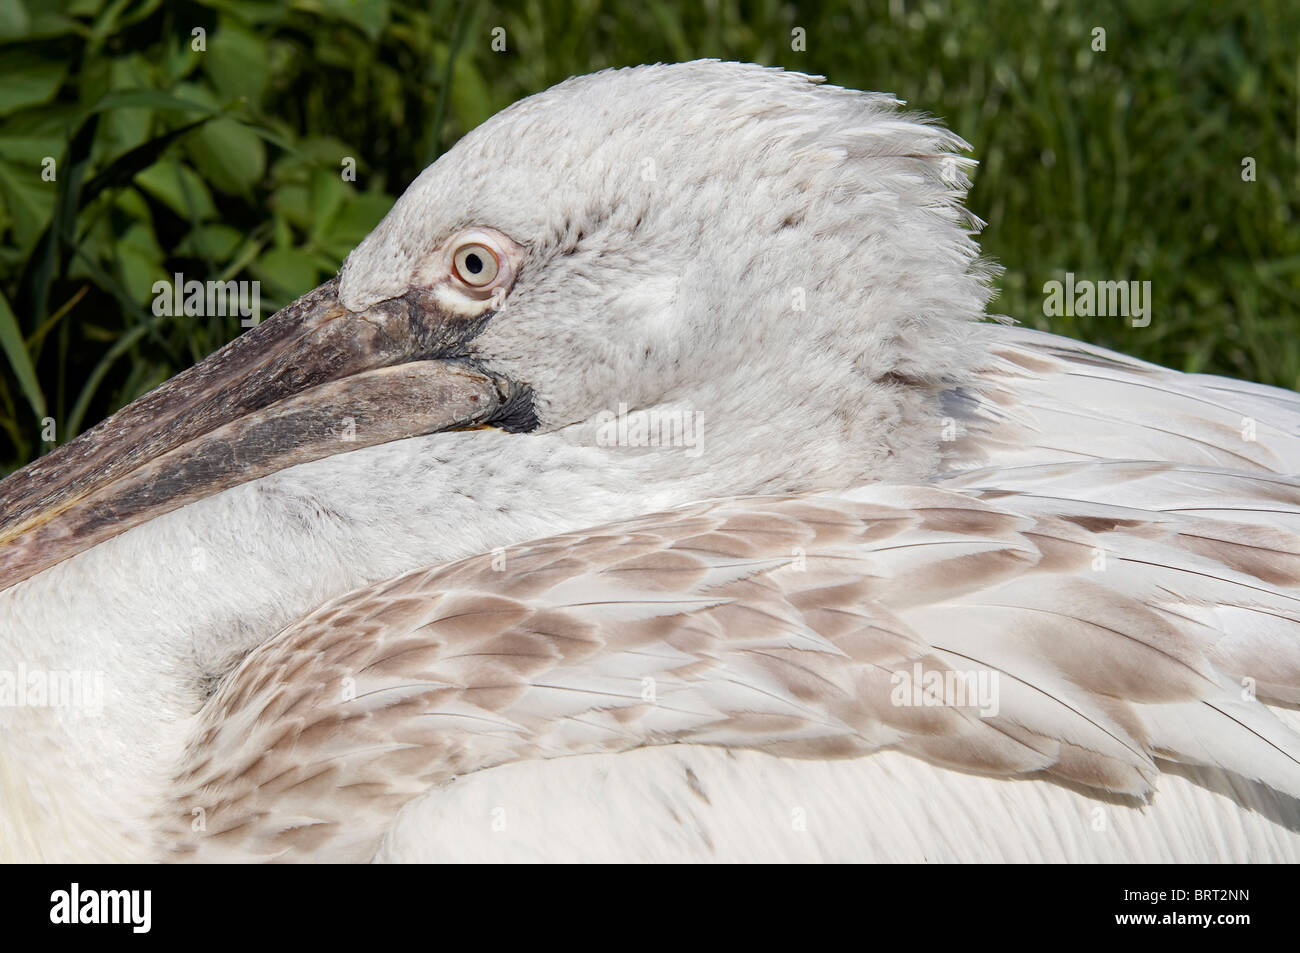 Dalmatian pelican - detail of the head and eye Stock Photo